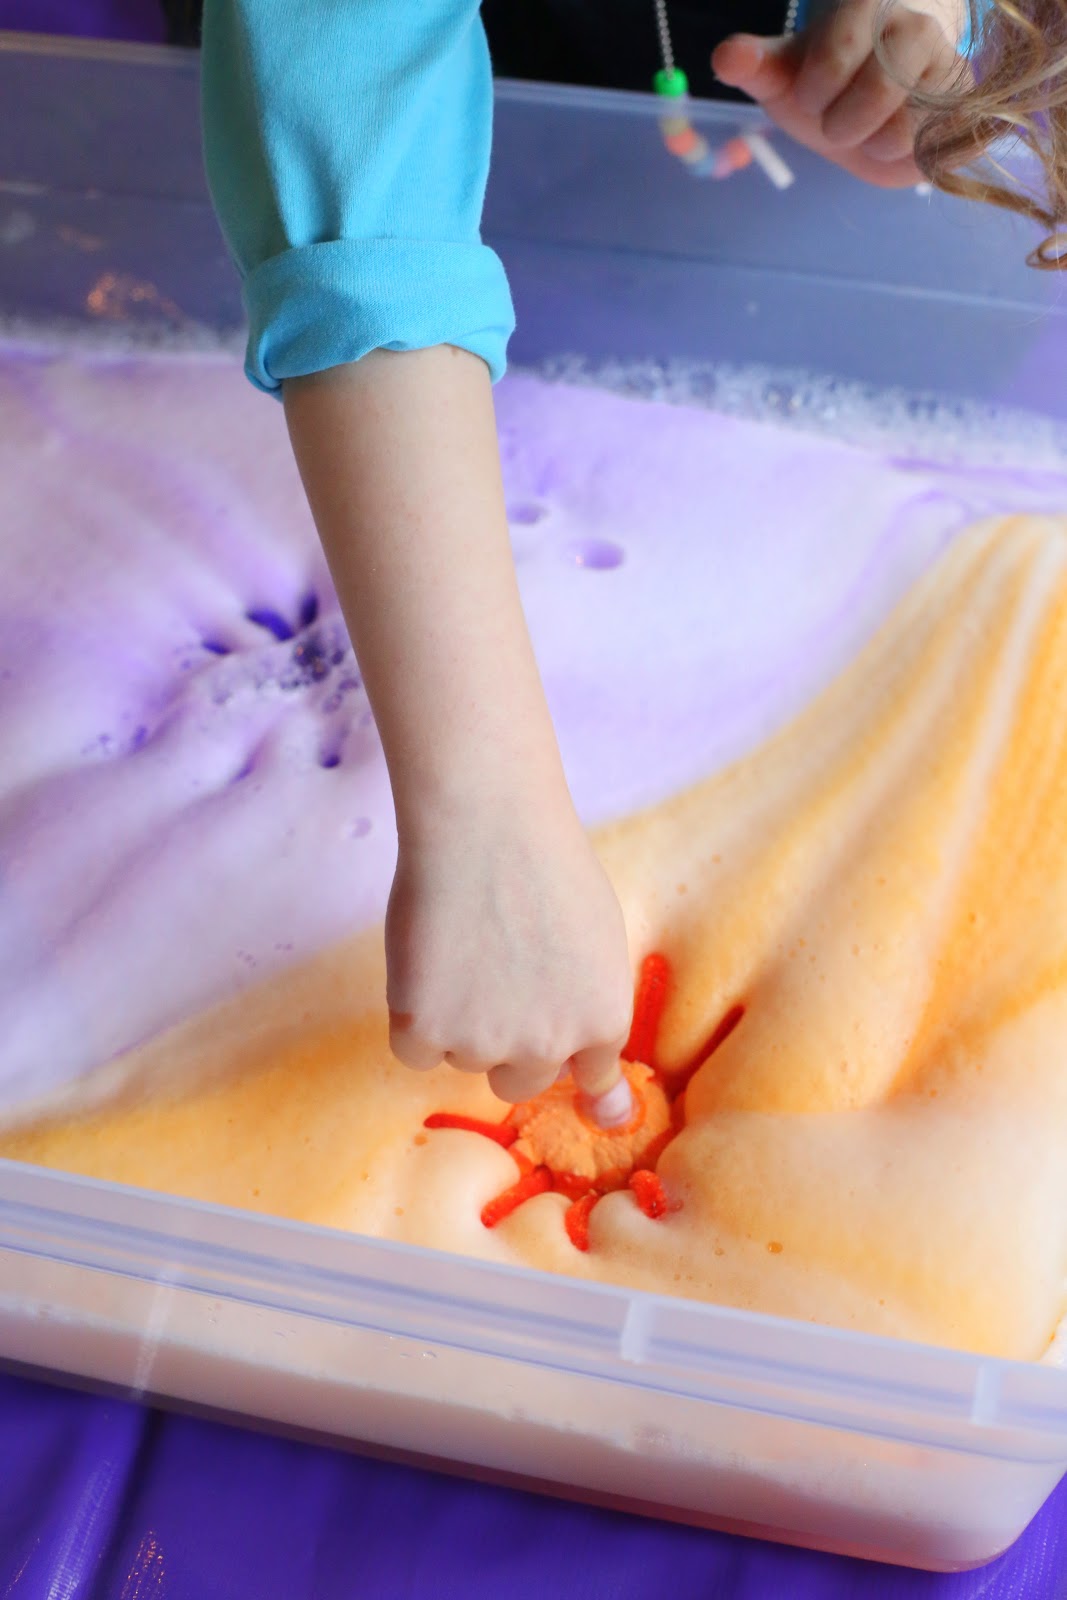 Magic Halloween Foaming Spiders - they shoot out rays of colored soap foam and disappear into a mound of fluffy colored foam, leaving baby spiders behind.  From Fun at Home with Kids